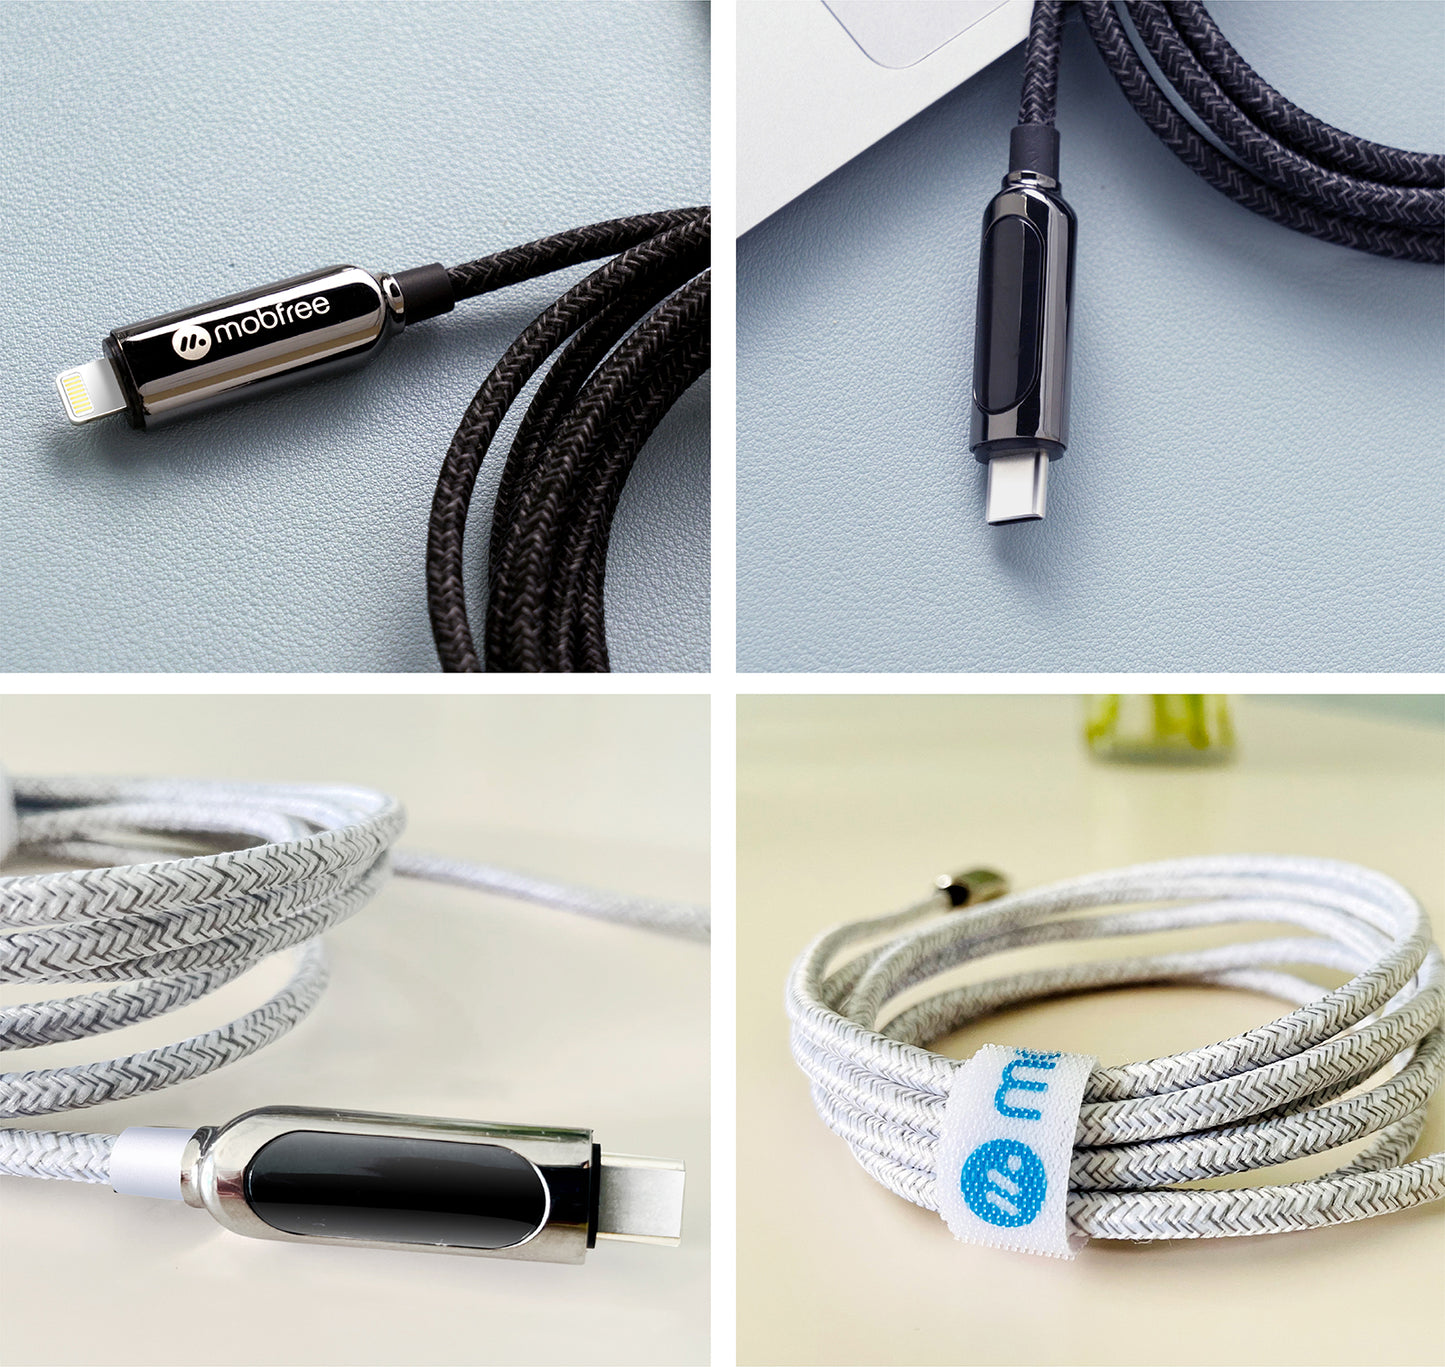 PixelCable USB-C to Lightning Cable (6ft)